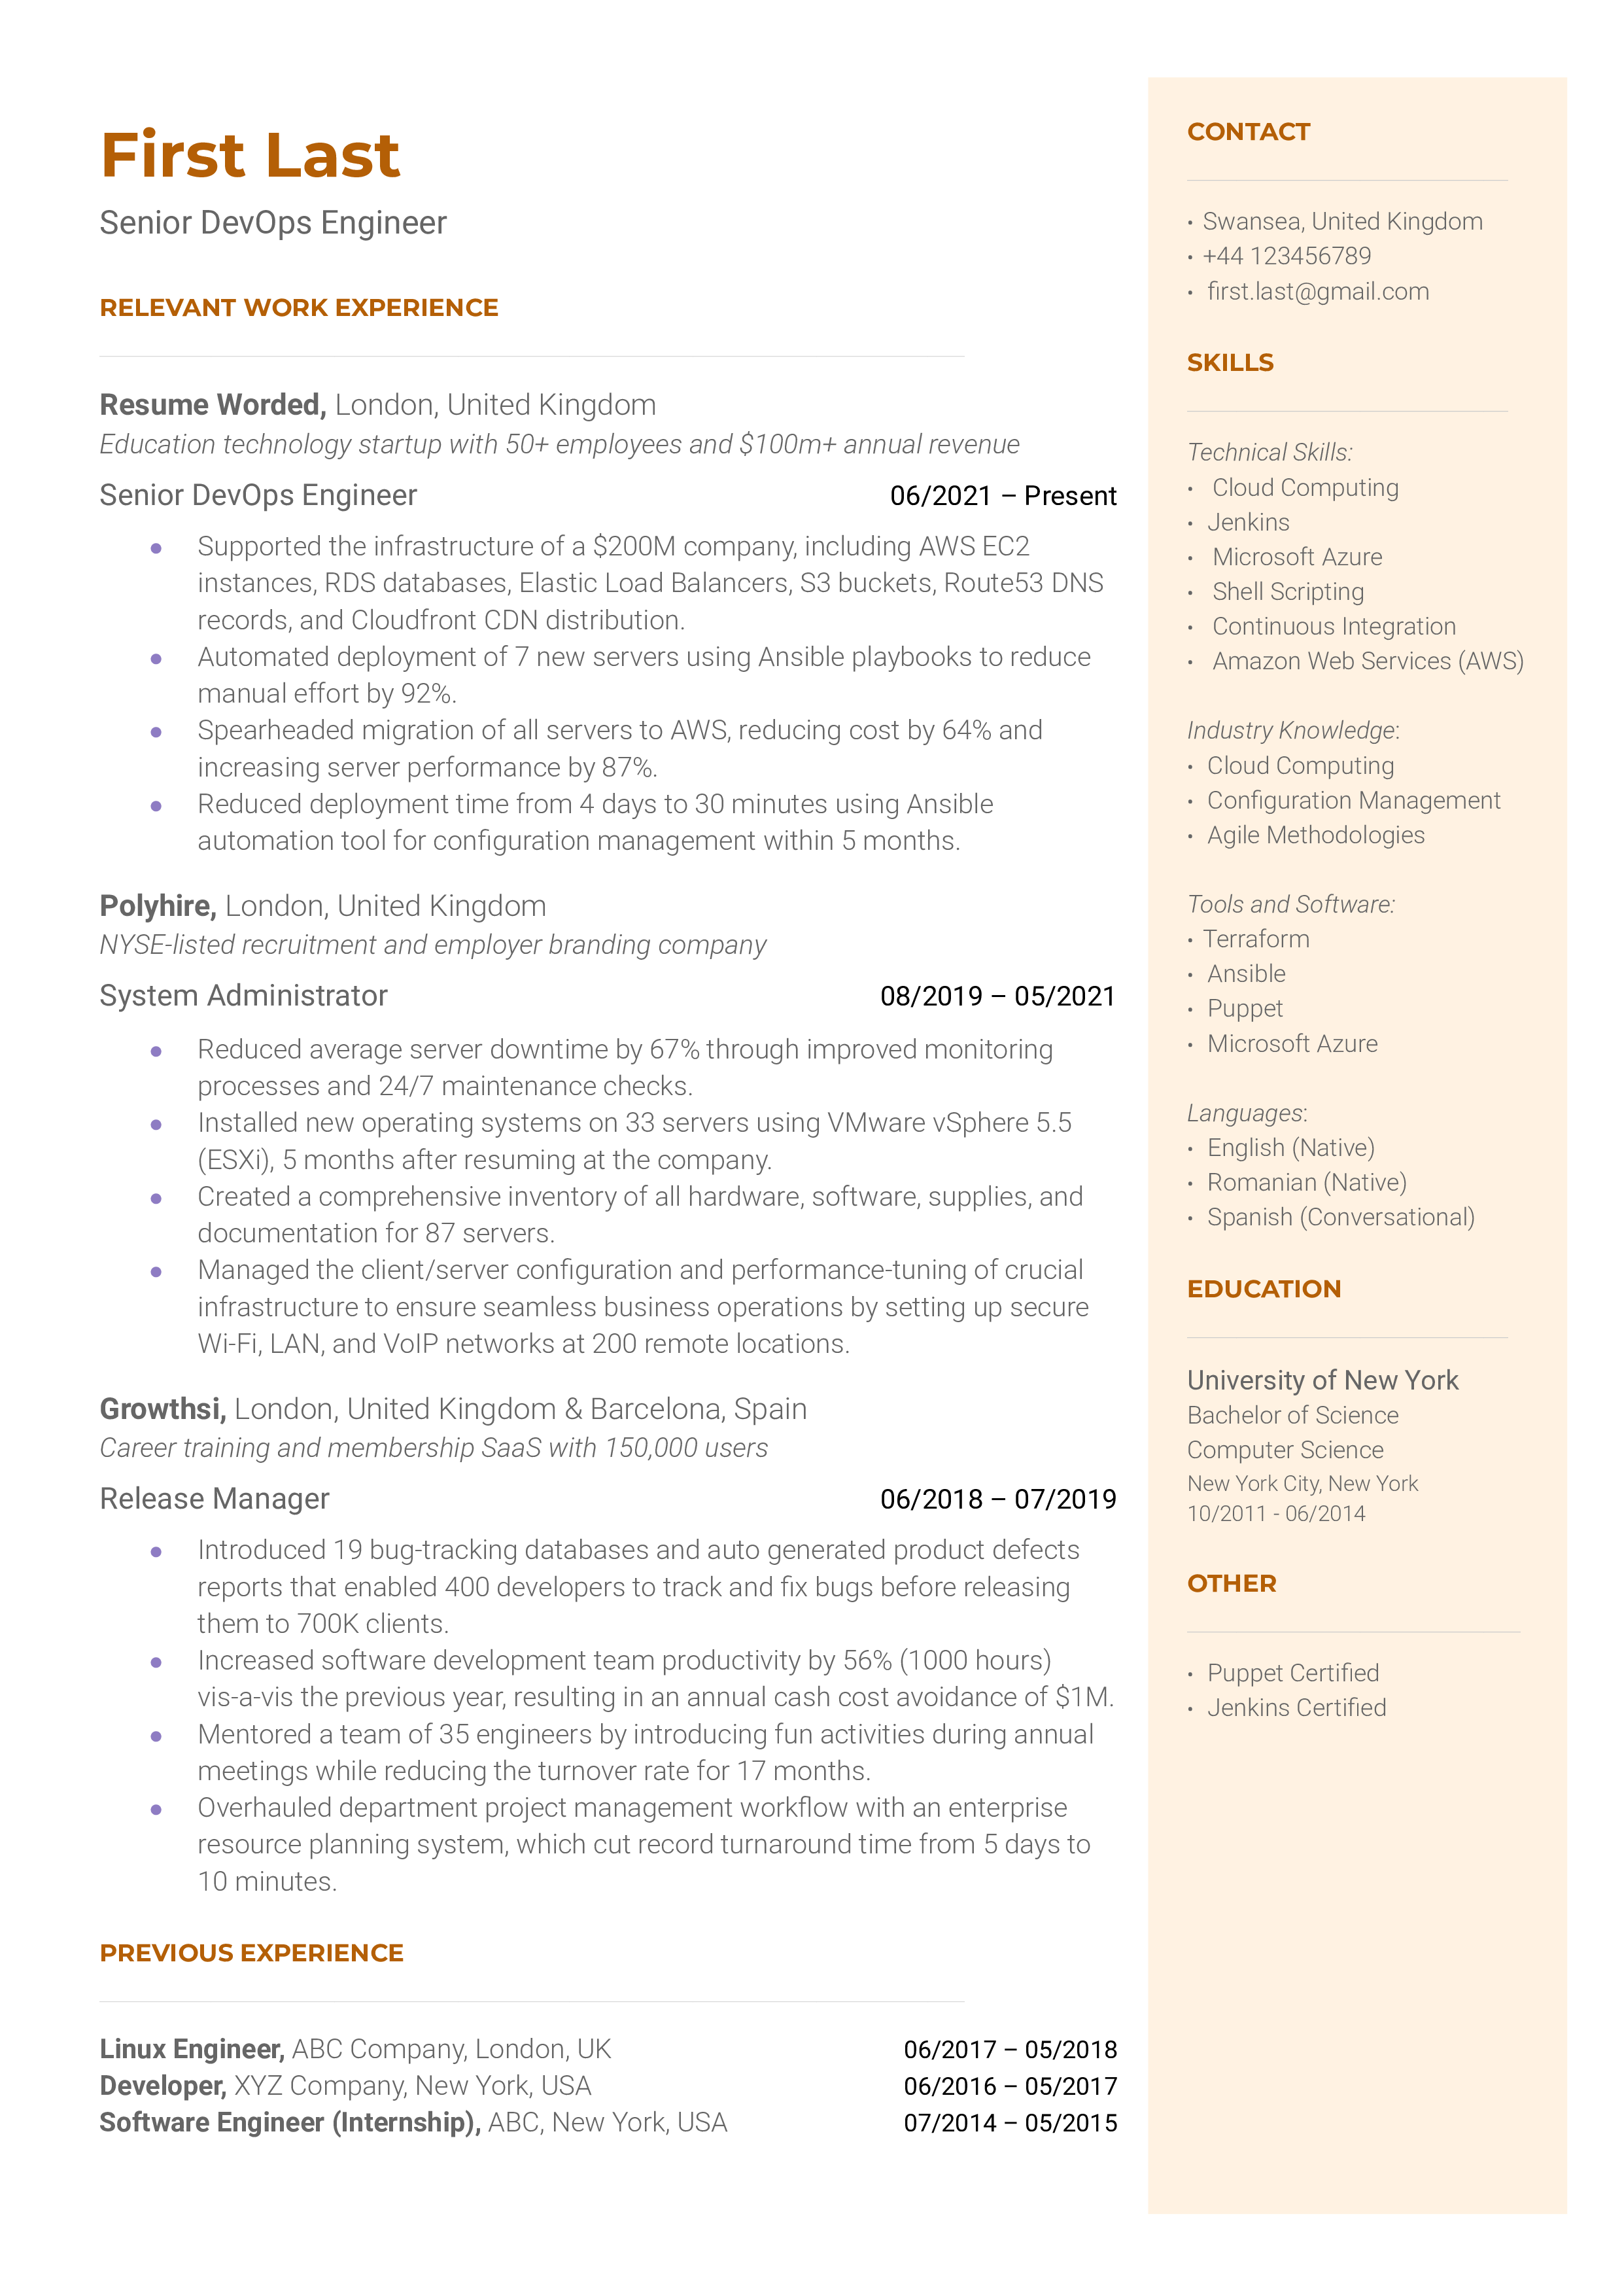 A screenshot of a well-structured Senior DevOps Engineer CV with relevant skills and experiences highlighted.